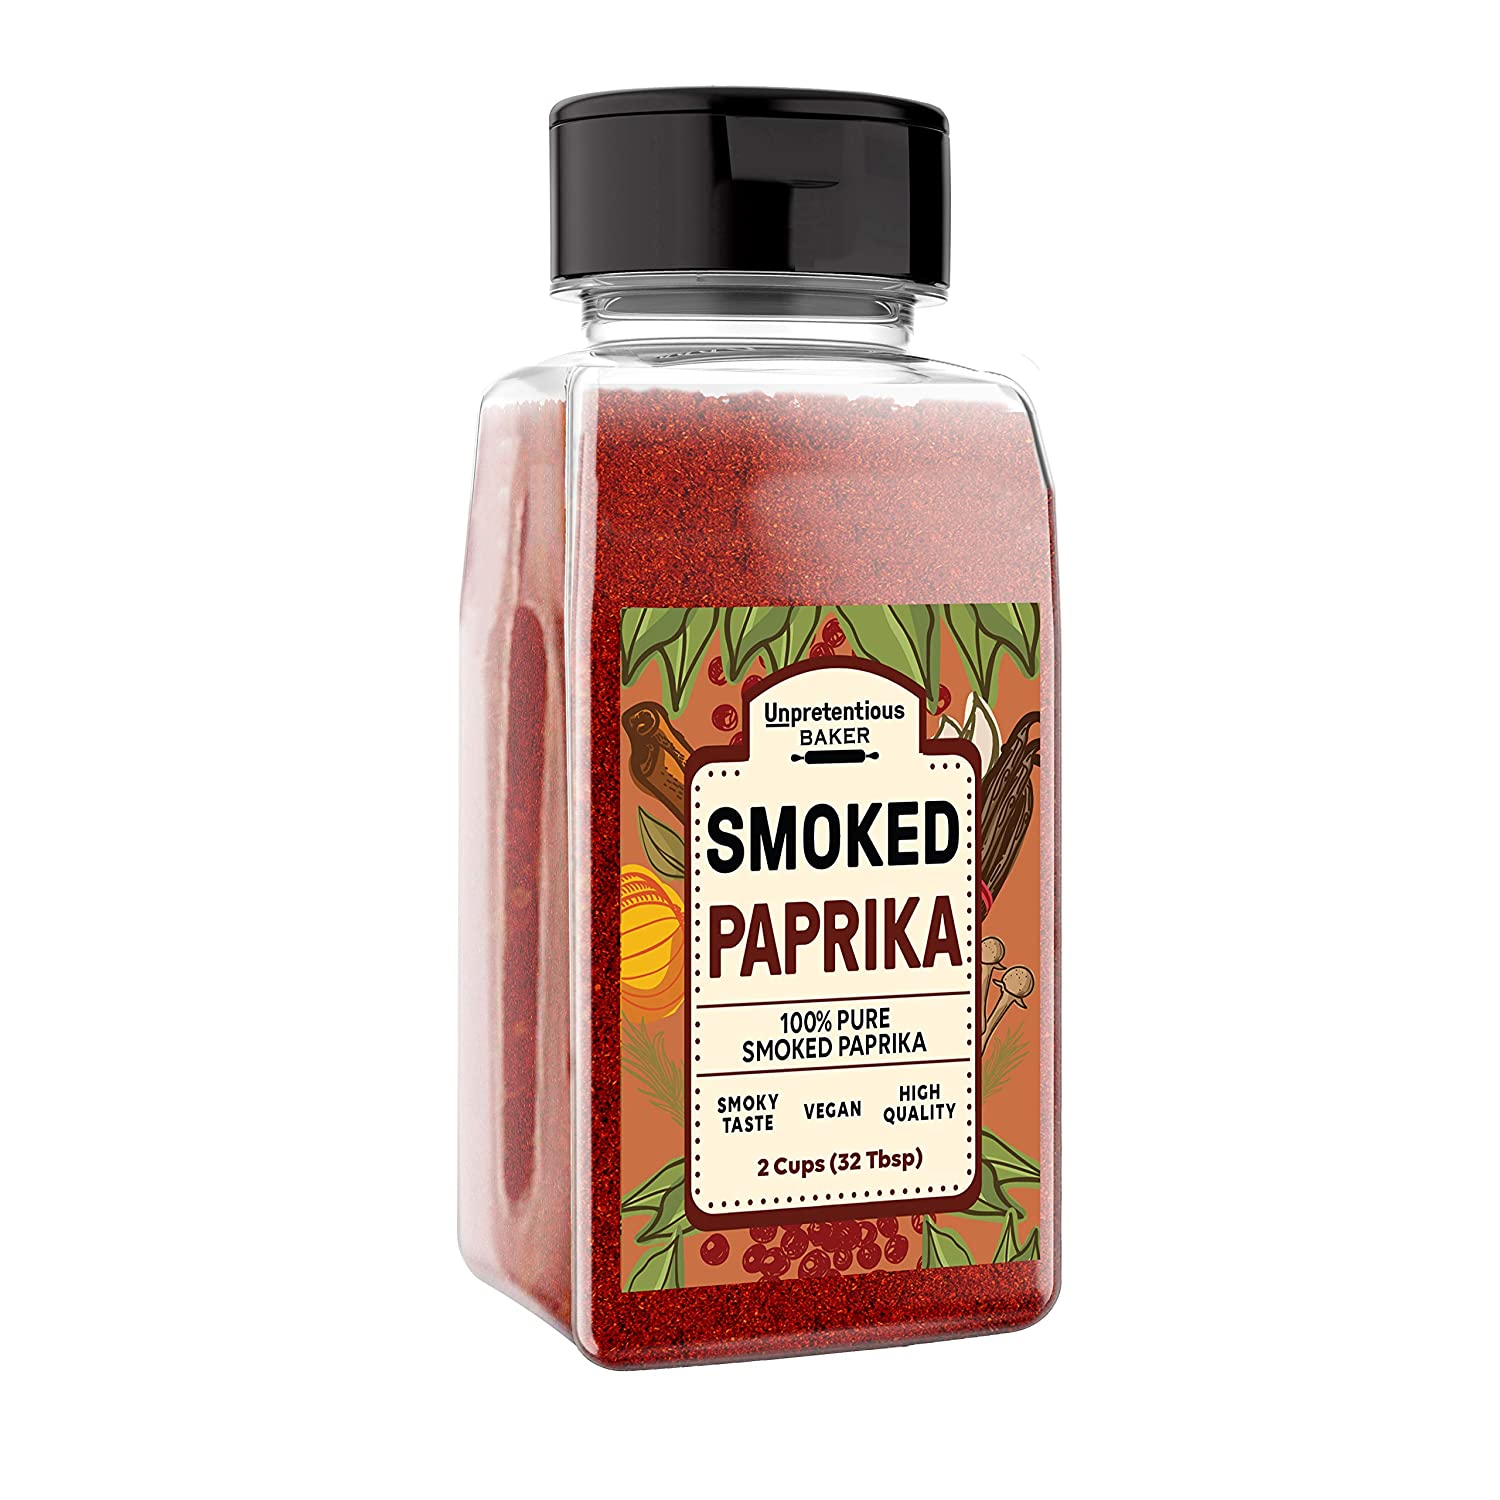 Smoked Paprika, 1 Cup, A Flavorful Ground Spice